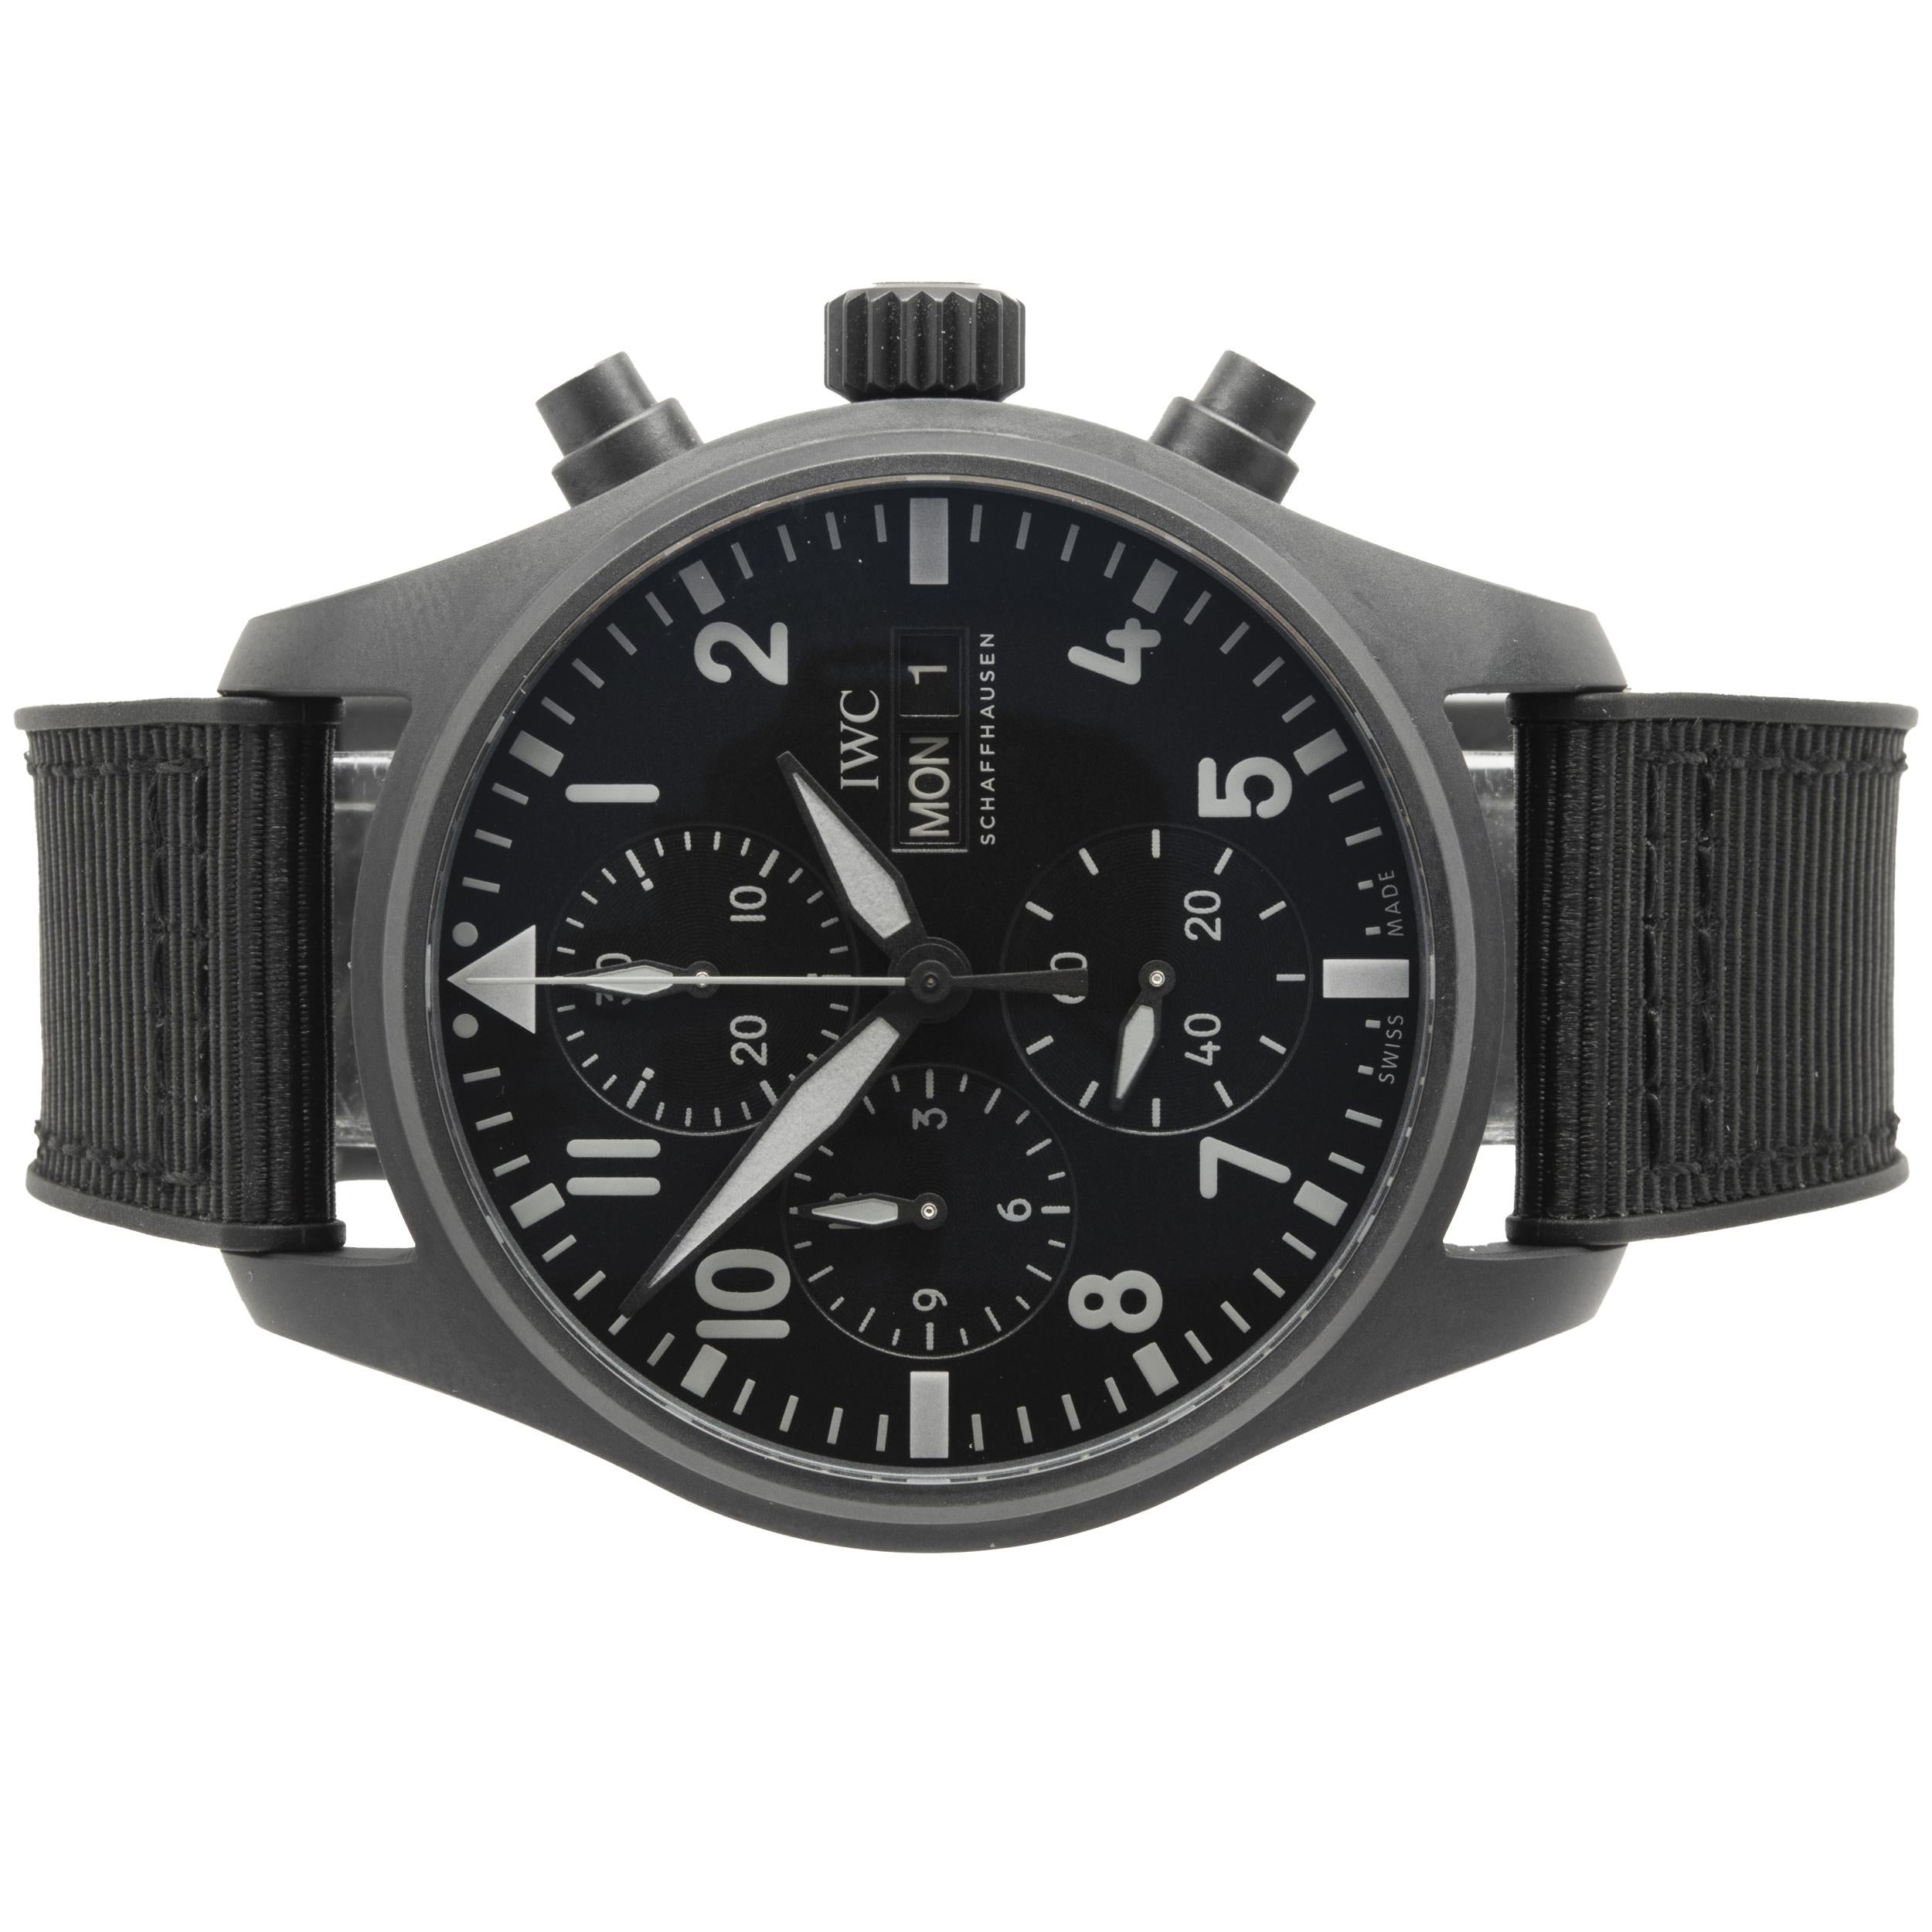 Brand: IWC
Movement: automatic
Function: hour, minutes, seconds, day, date, chronograph
Case: 41mm black Ceratanium round case, sapphire crystal
Band: black rubber textile strap, buckle
Dial: black dial with luminescence
Reference #: IW388106
Serial